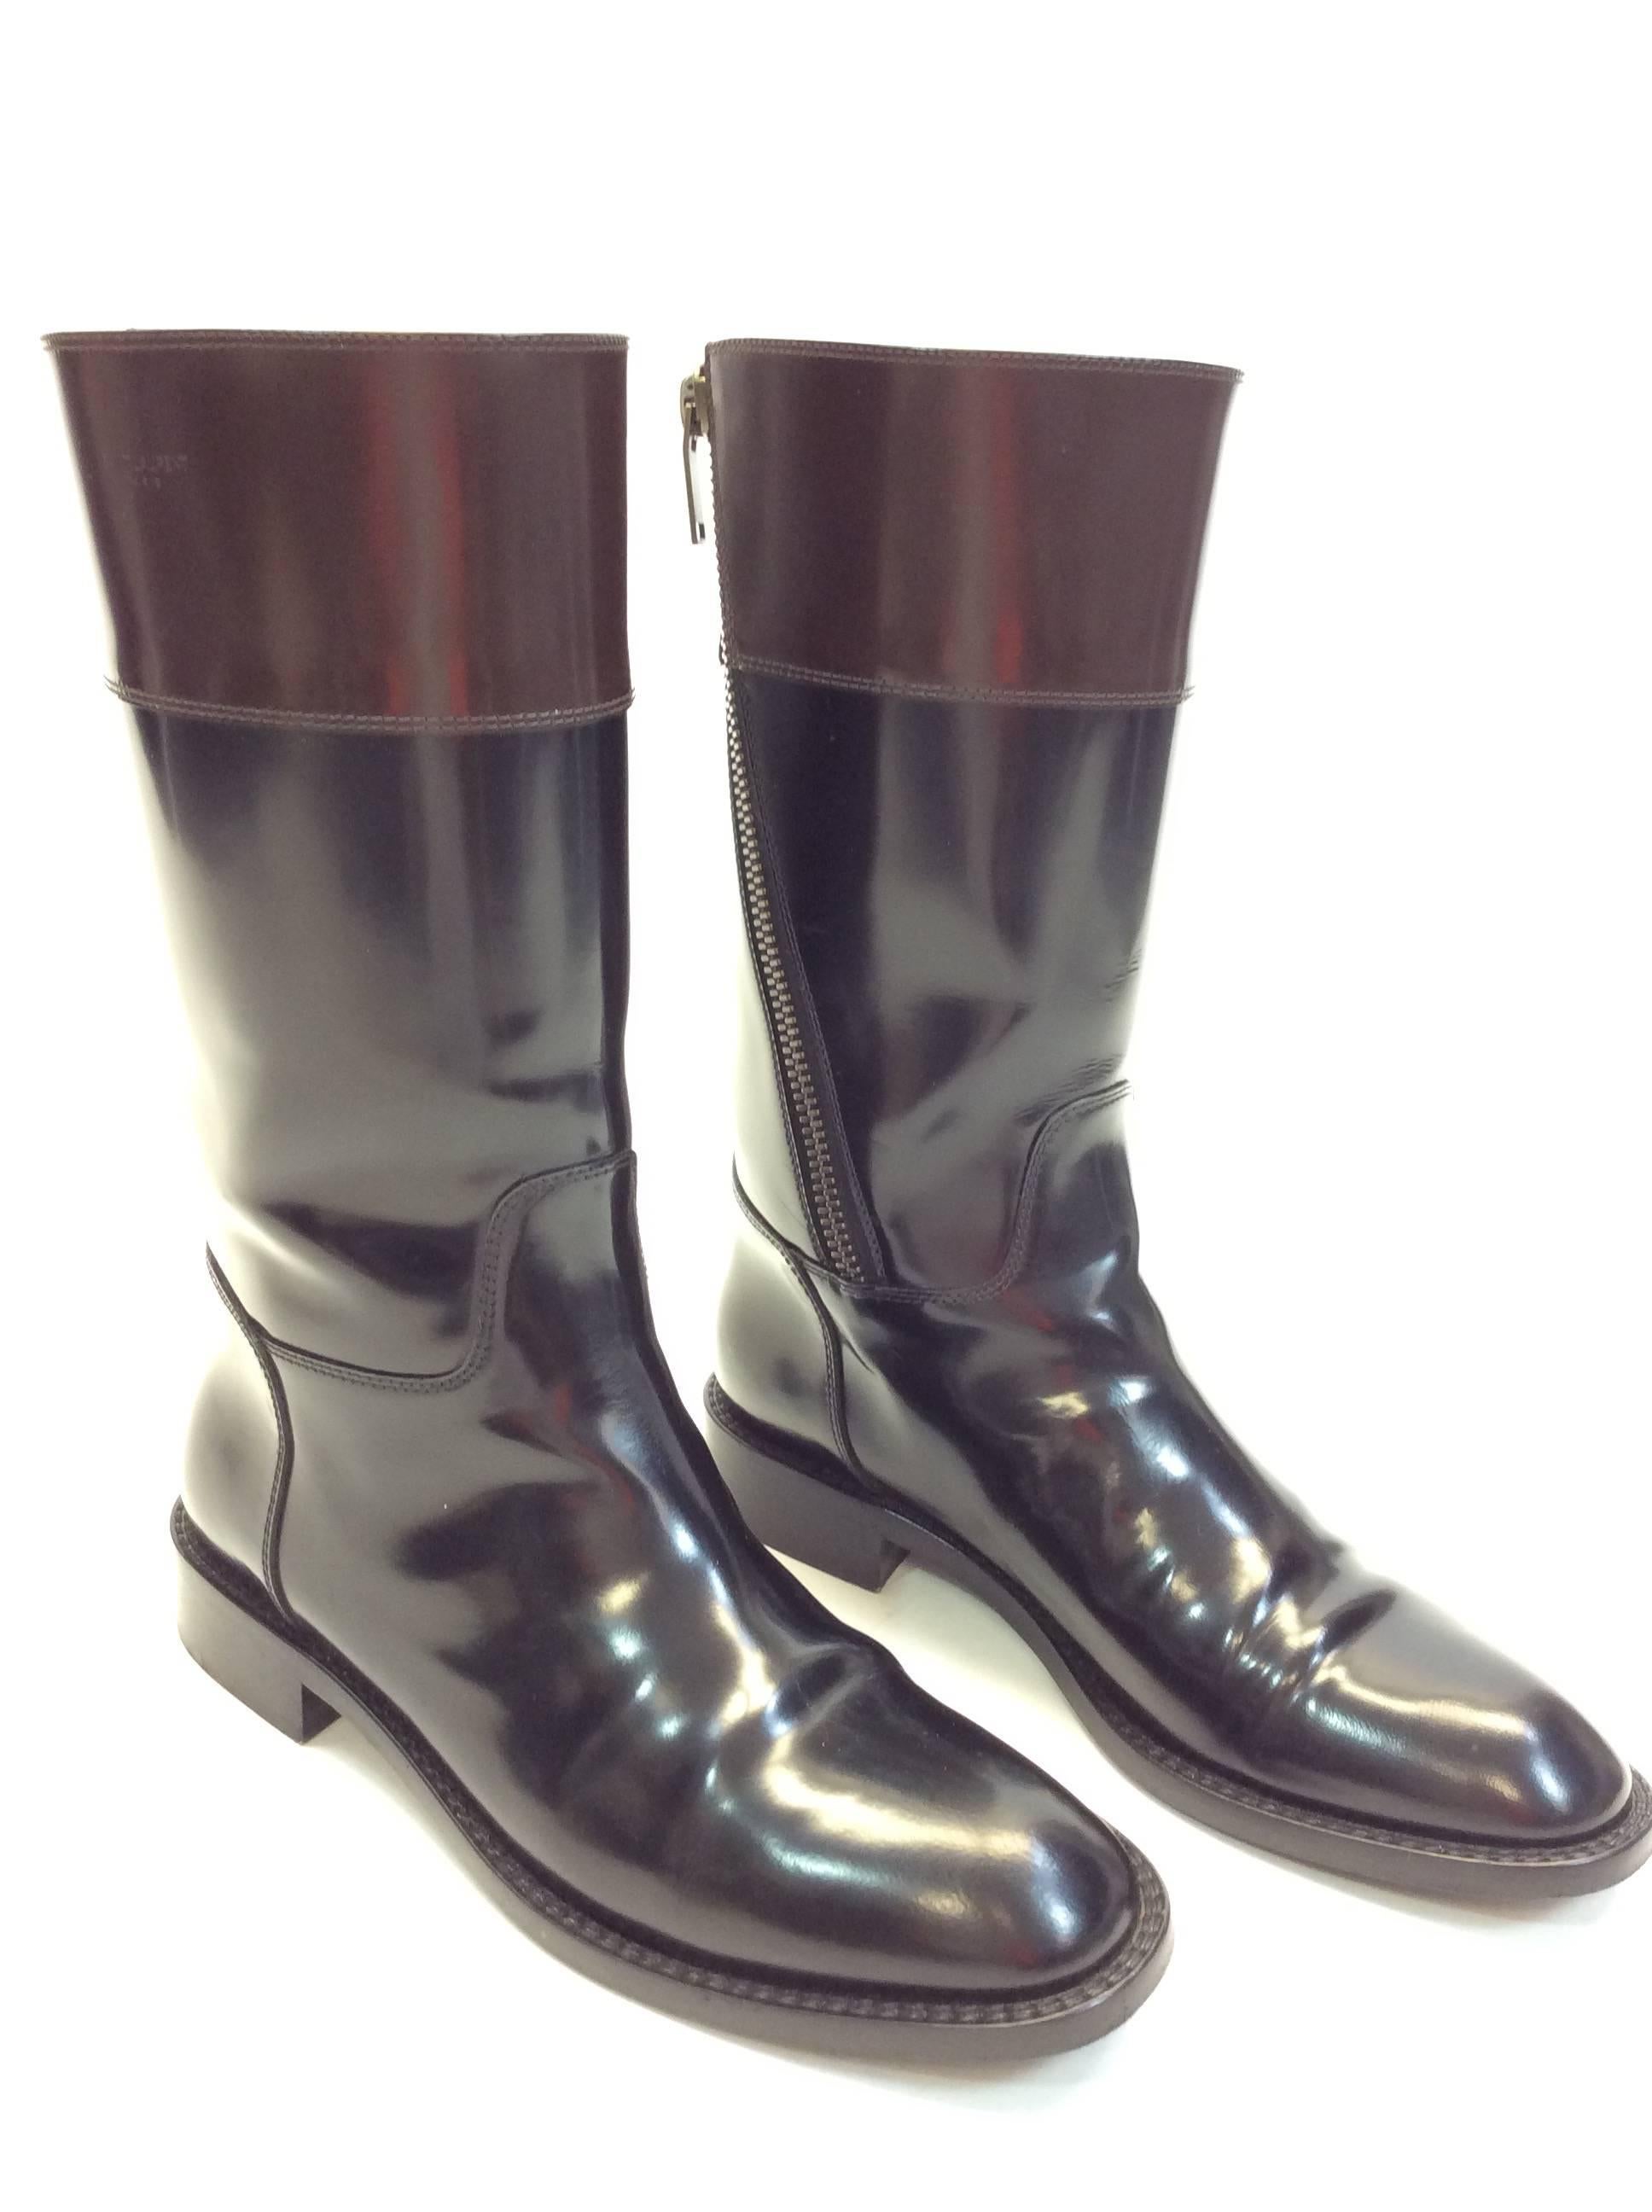 Saint Laurent Black and Brown Patent Leather Boots In Excellent Condition For Sale In Narberth, PA